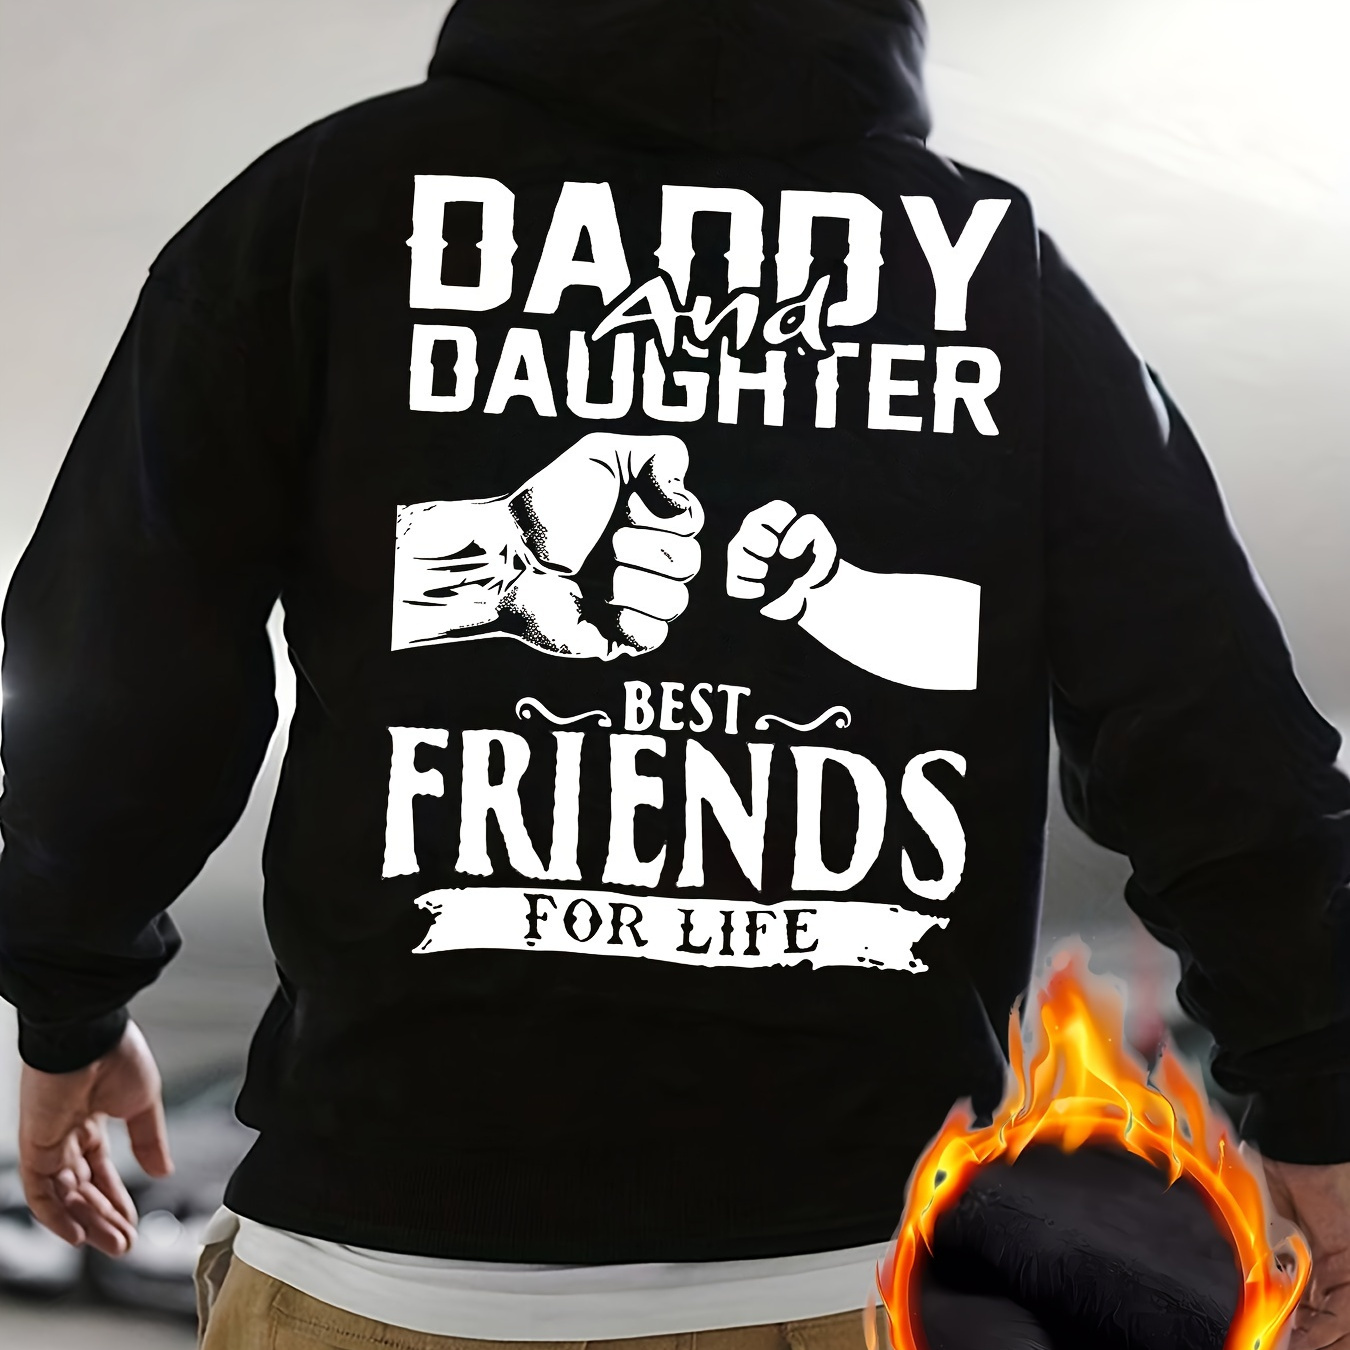 

Daddy Friend Print Men's Pullover Round Neck Hoodies With Kangaroo Pocket Long Sleeve Hooded Sweatshirt Loose Casual Top For Autumn Winter Men's Clothing As Gifts